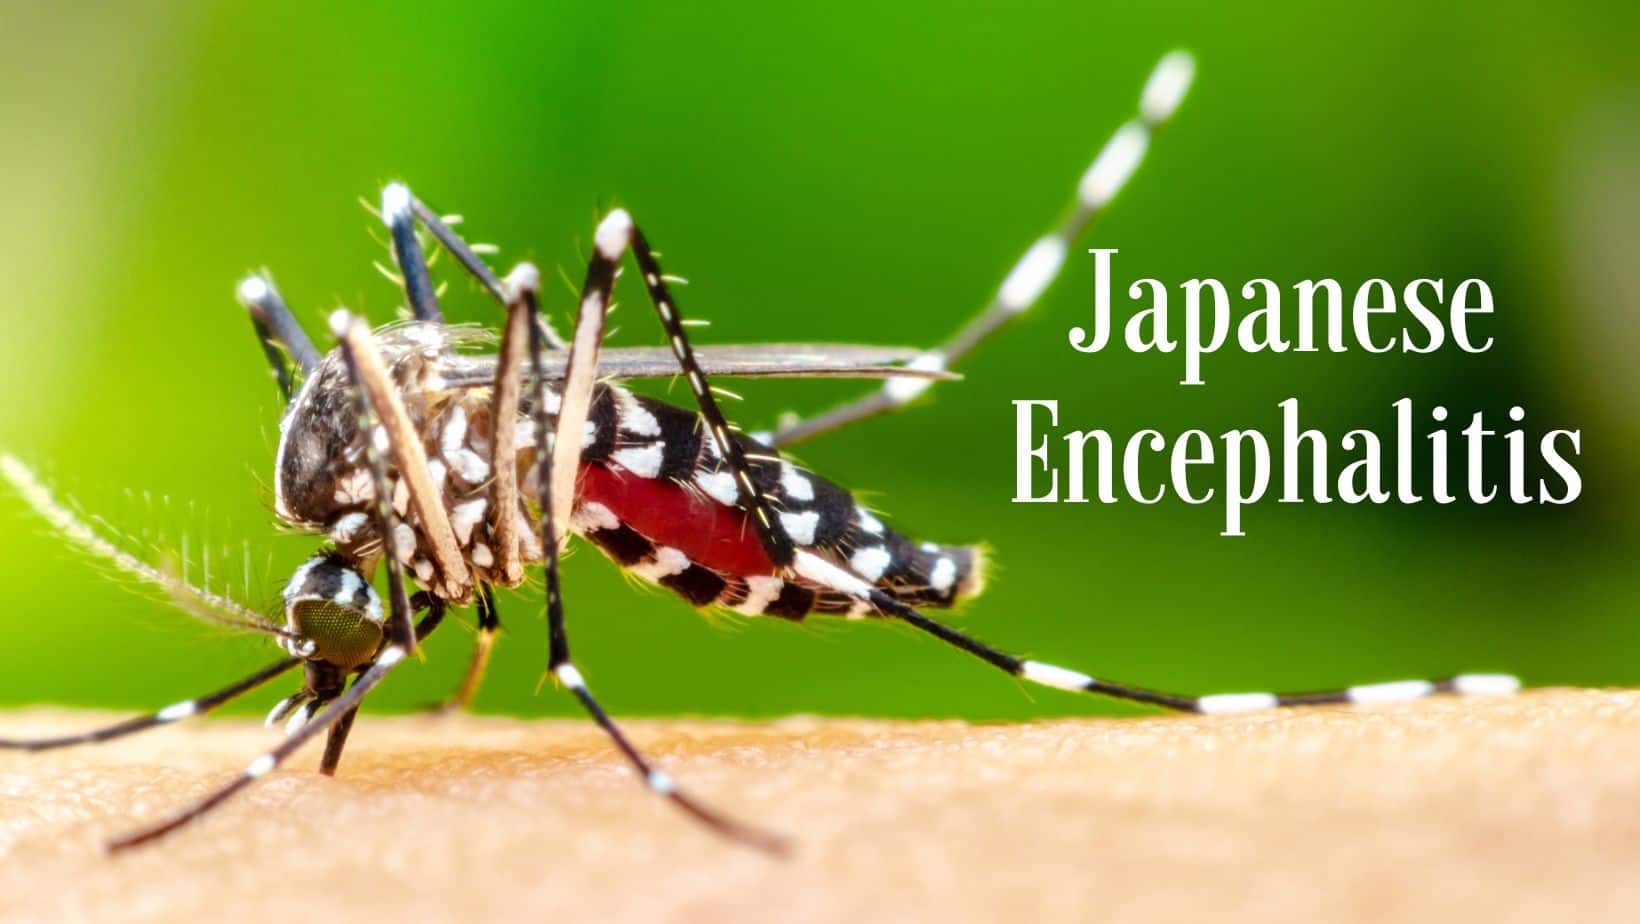 Mizoram Records Japanese Encephalitis' First Case To Bivalent Covid-19 Vaccine In India: Top Health Headlines of The Day